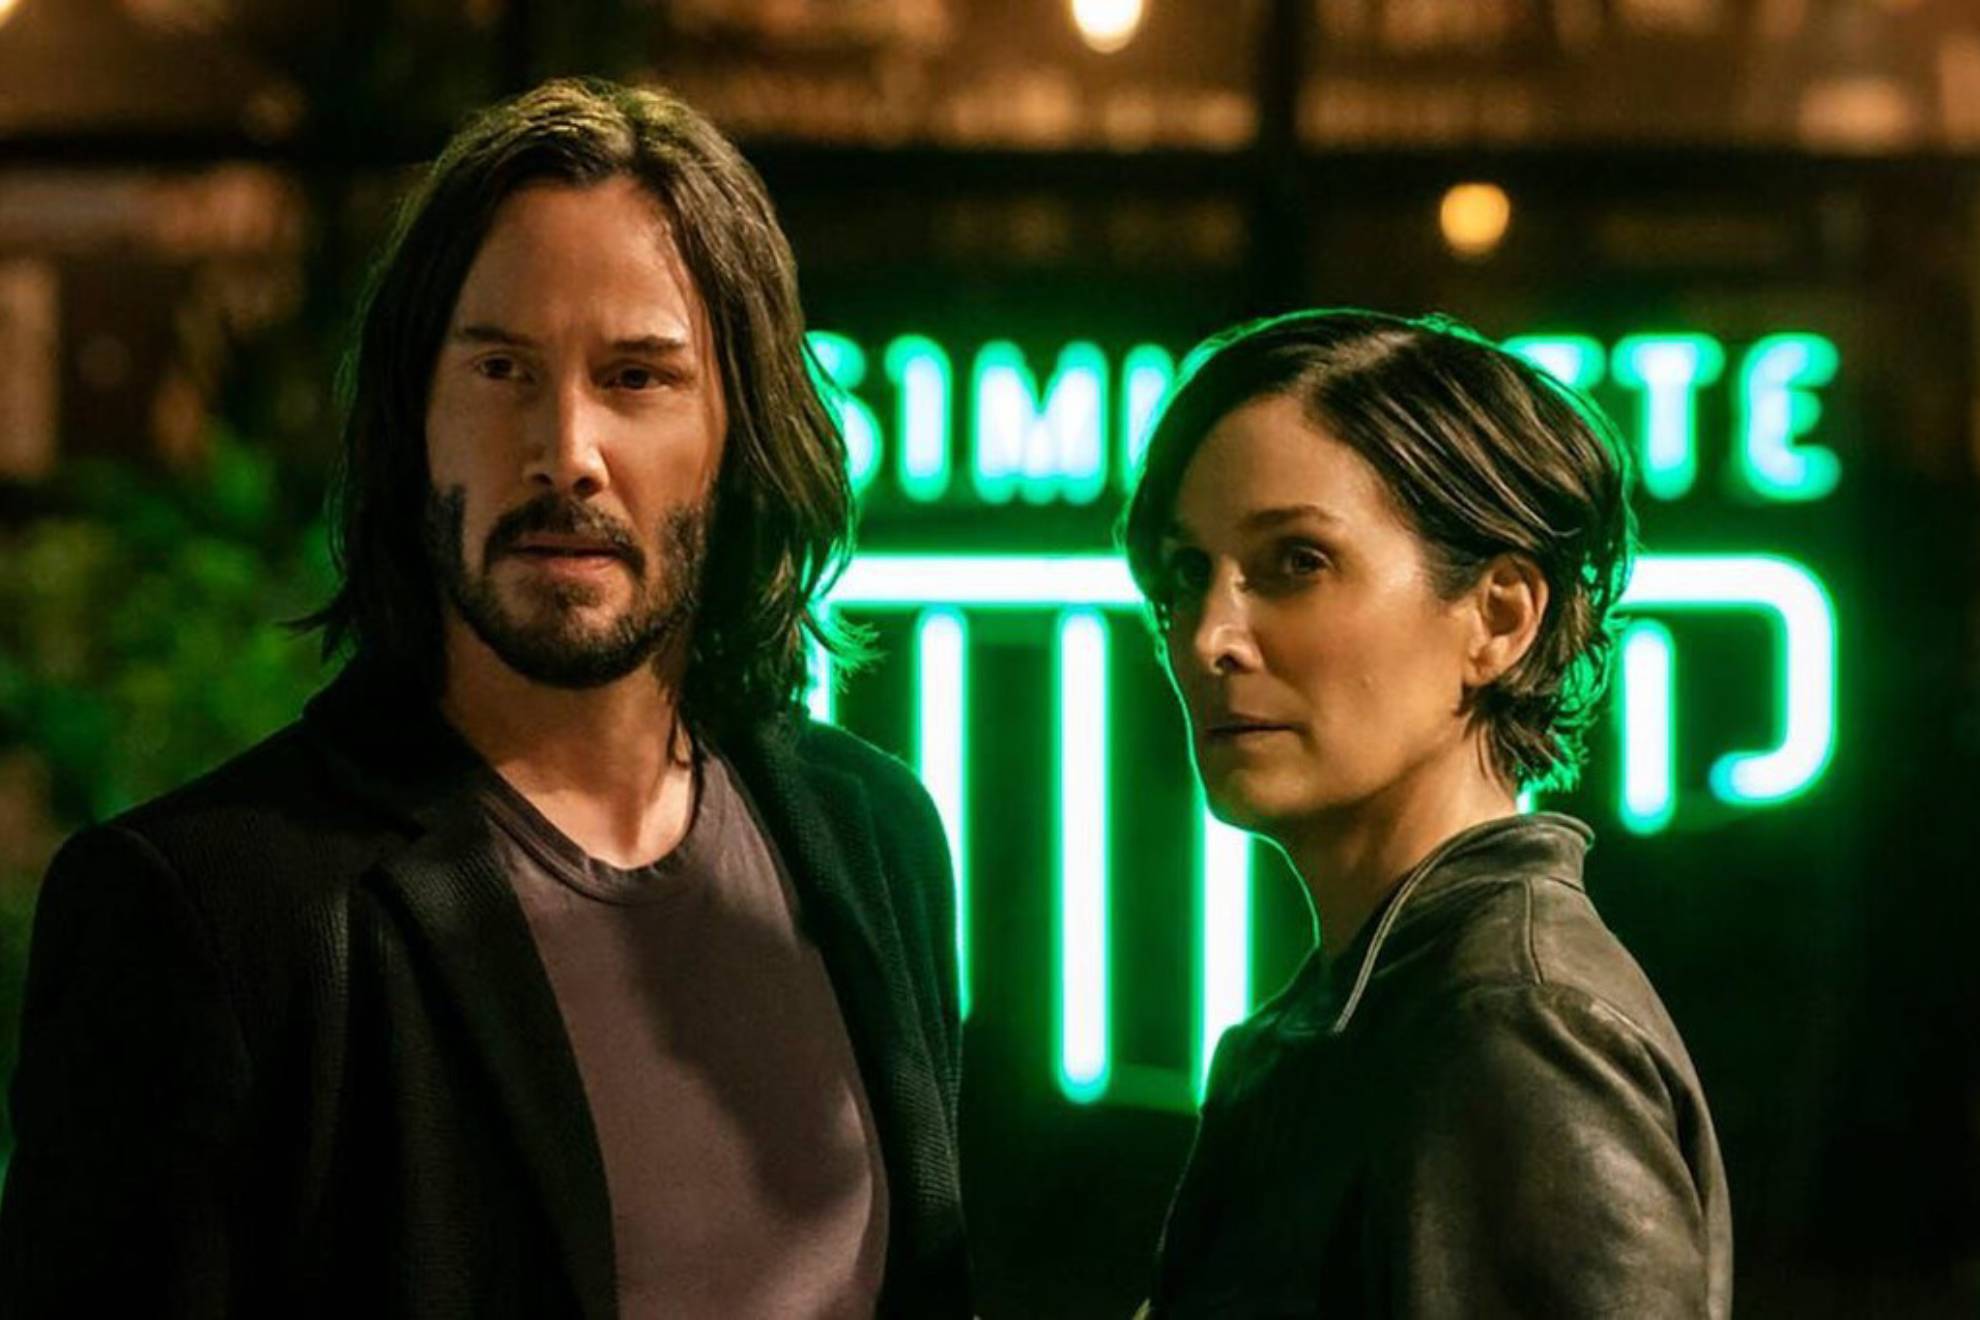 Keanu Reeves and Carrie-Anne Moss in Matrix Resurrections.